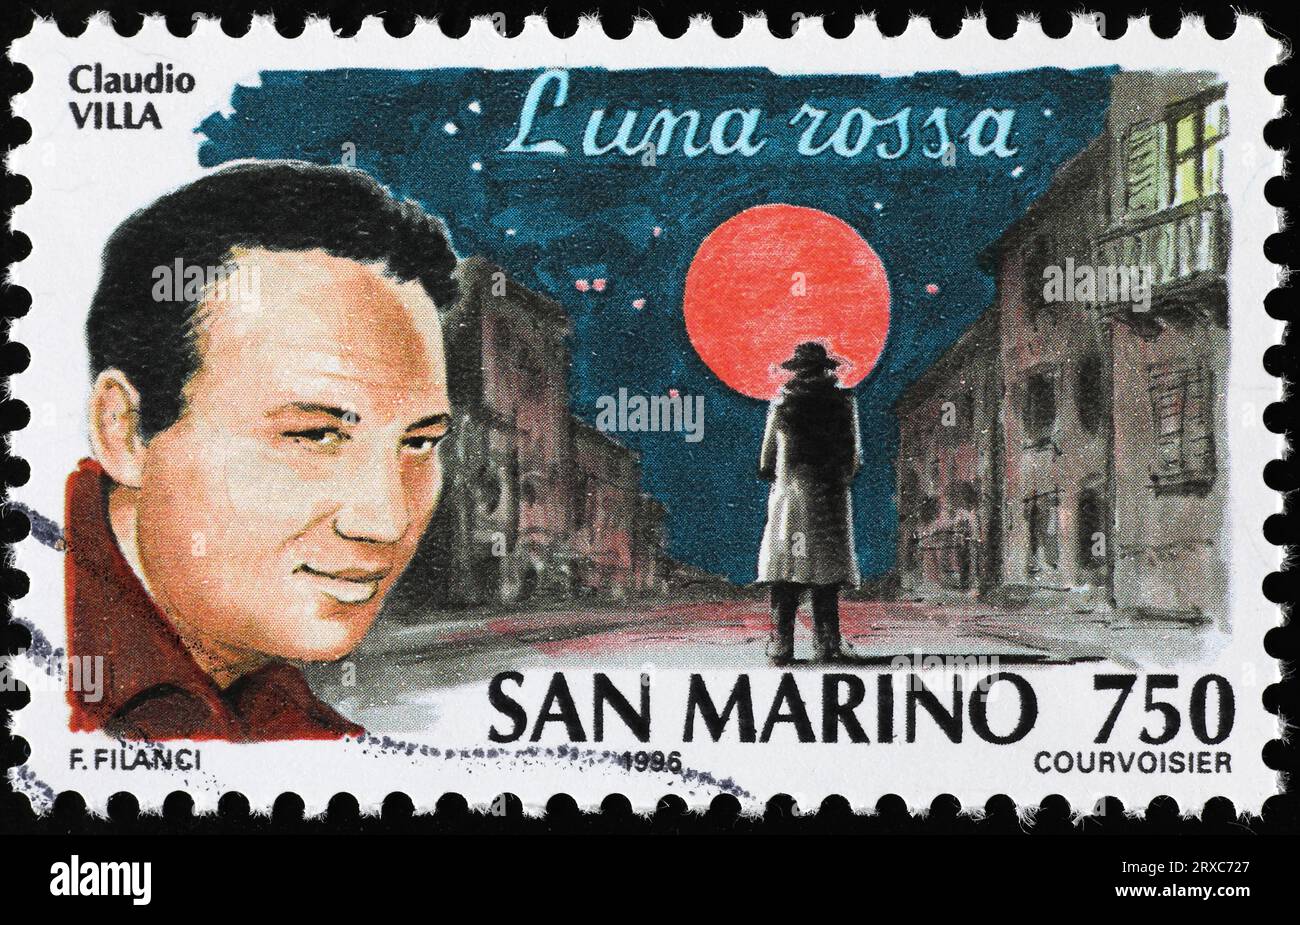 Old italian song by Claudio Villa on vintage stamp Stock Photo